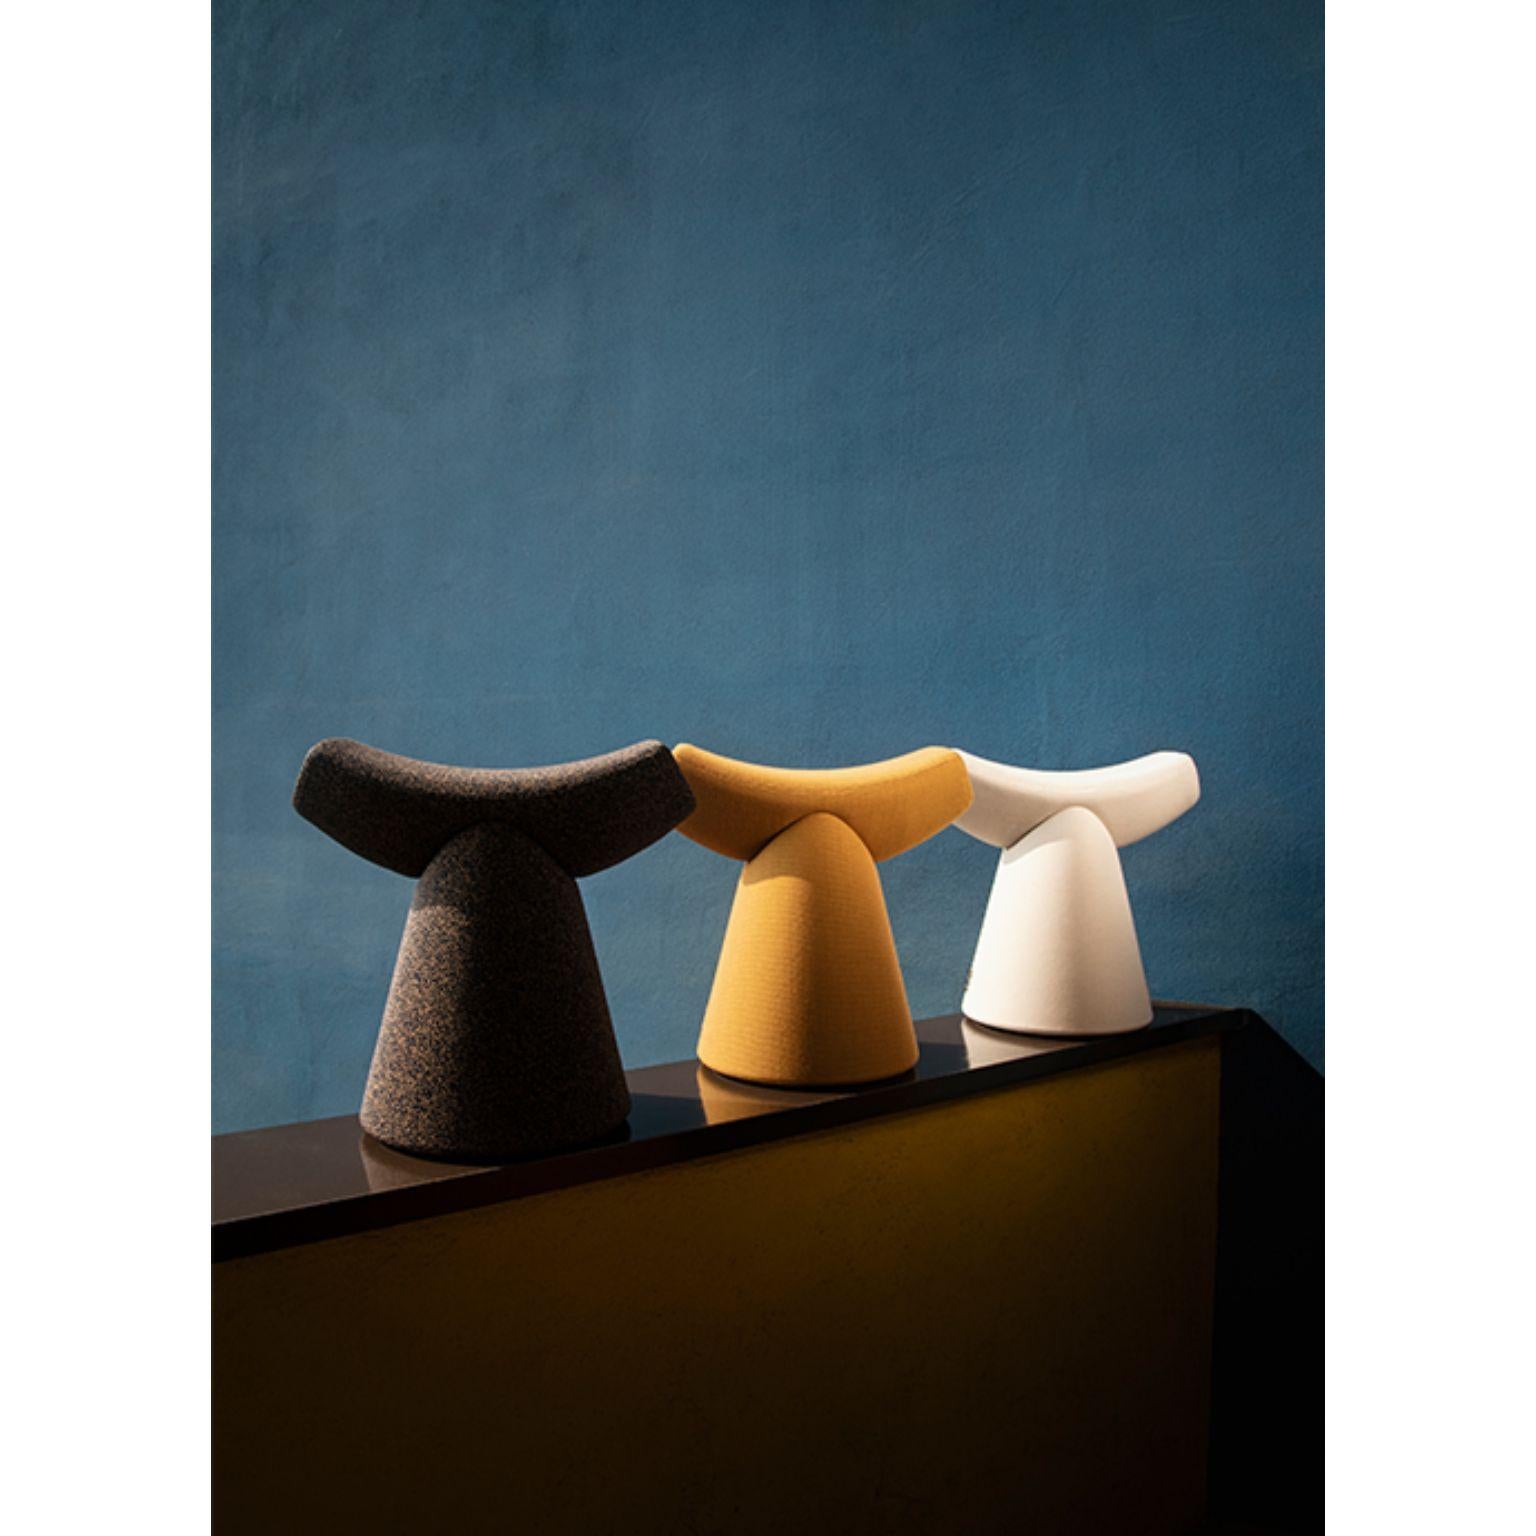 Set of 3 gardian stool by Patrick Norguet.
Materials: fabric (also available in leather).
 Handle: noce Canaletto solid wood.
Dimensions: W51.1 x D34.7 x H49.8 cm.

For the Gardian stool by designer Patrick Norguet, the concept of seating was